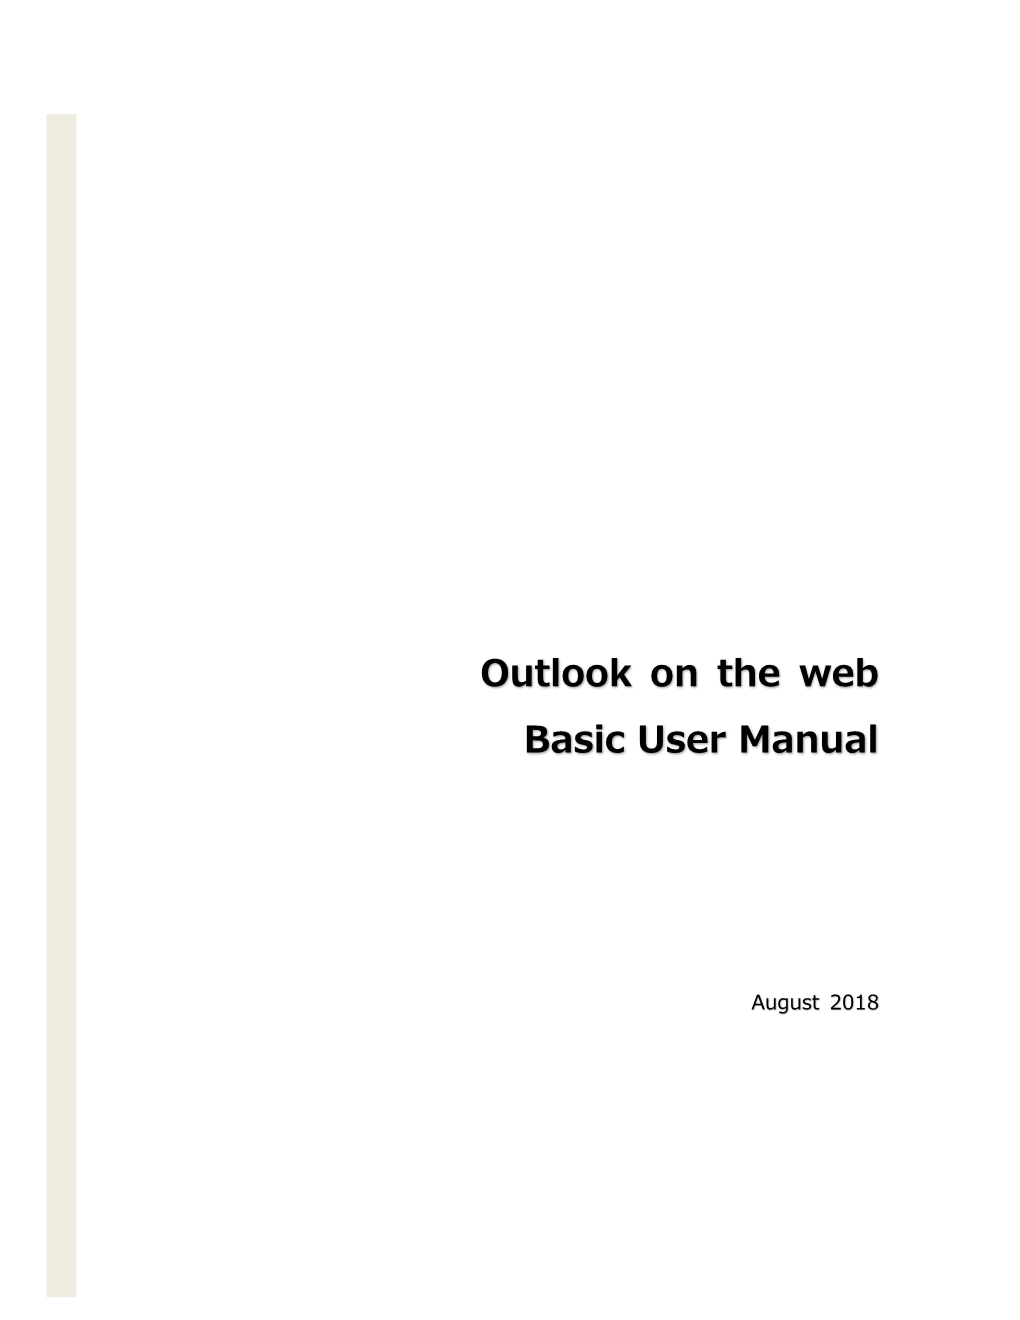 Outlook on the Web Basic User Manual